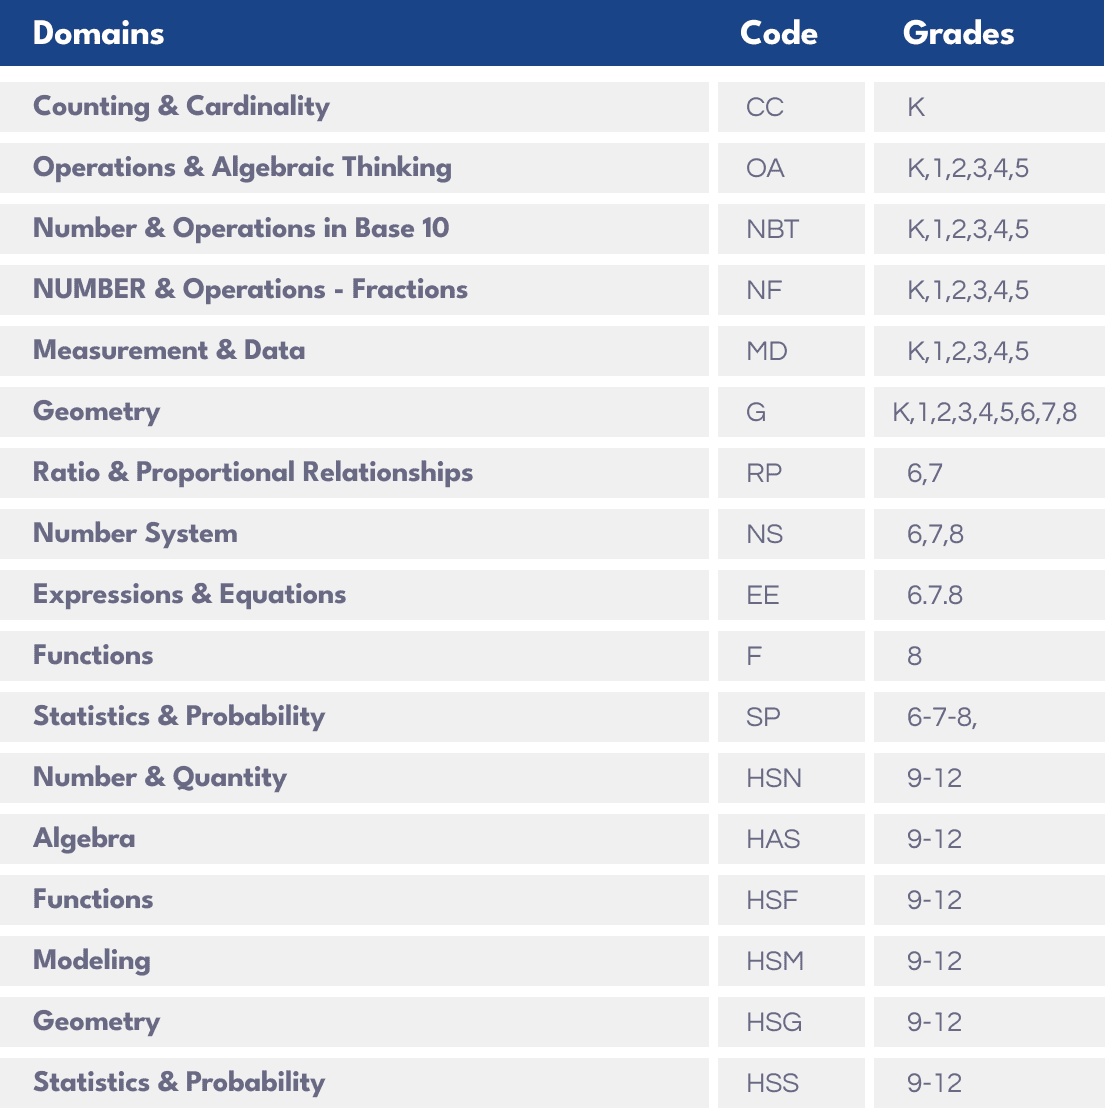 What Math Domains are Covered in K-12 Grades